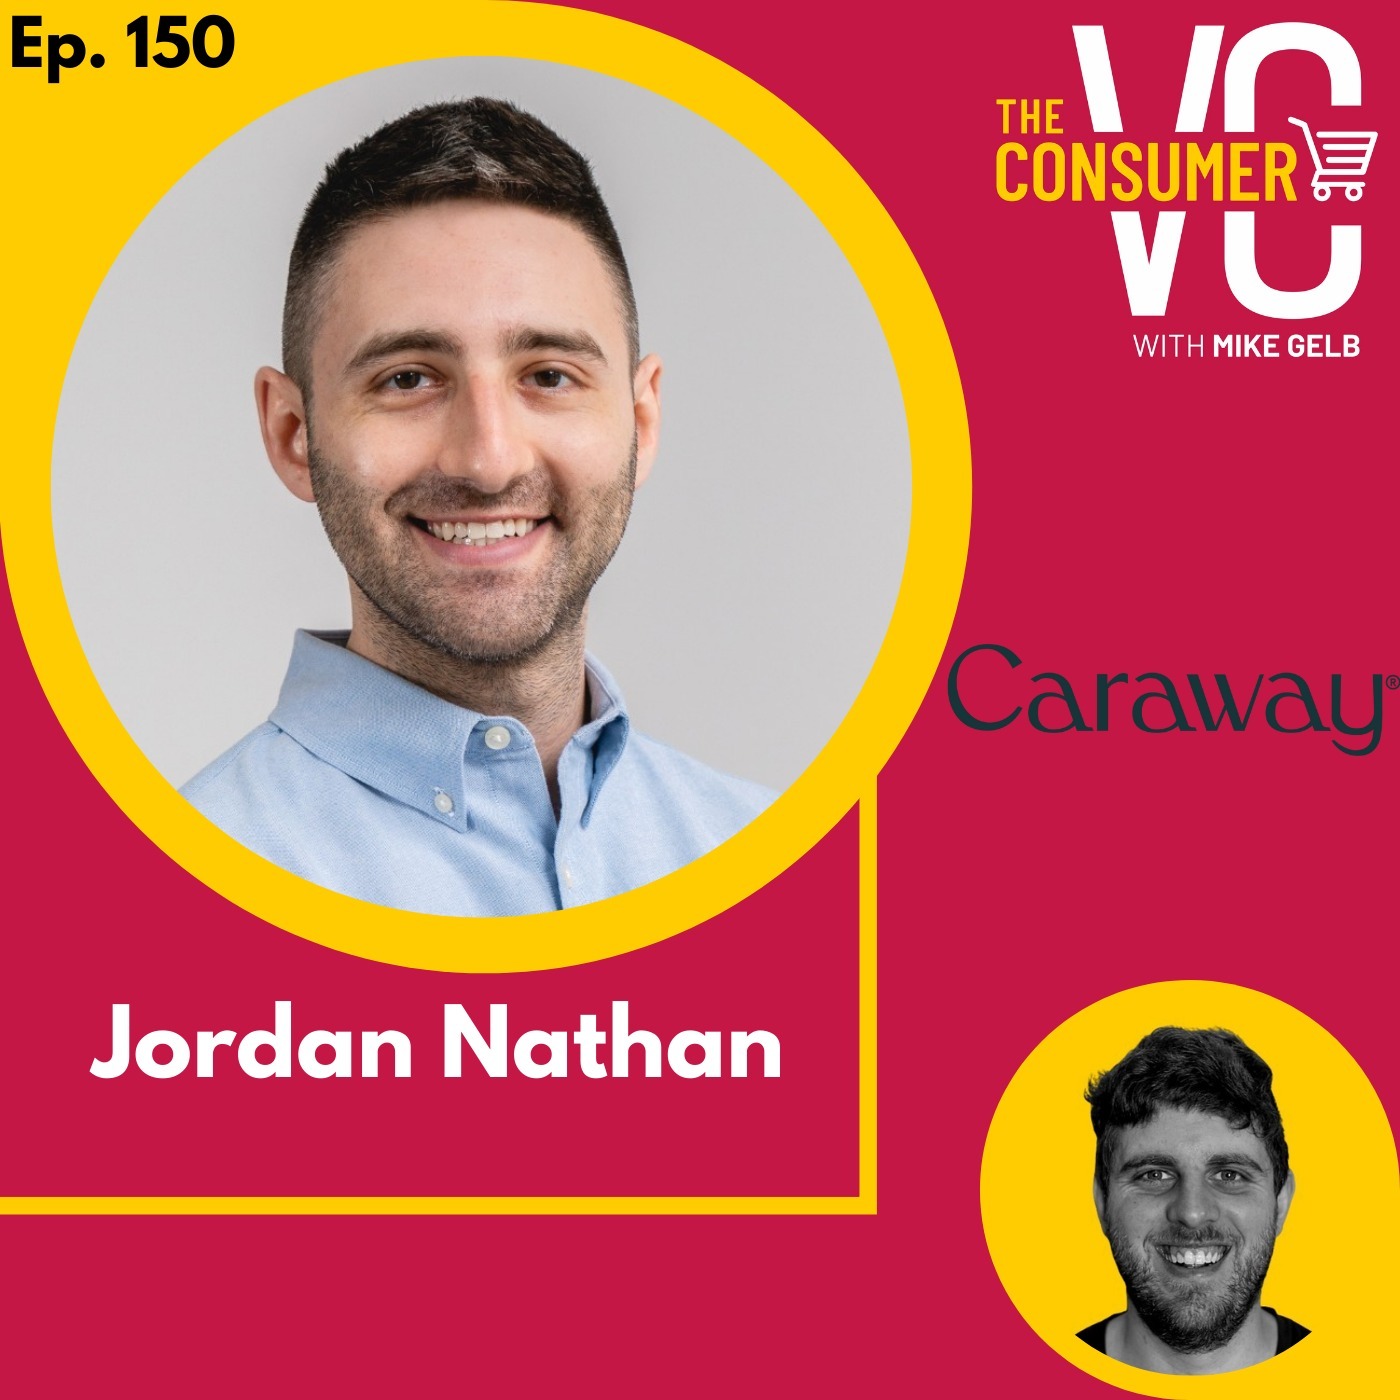 Jordan Nathan (Caraway) - Scaling one of the fastest growing brands during COVID